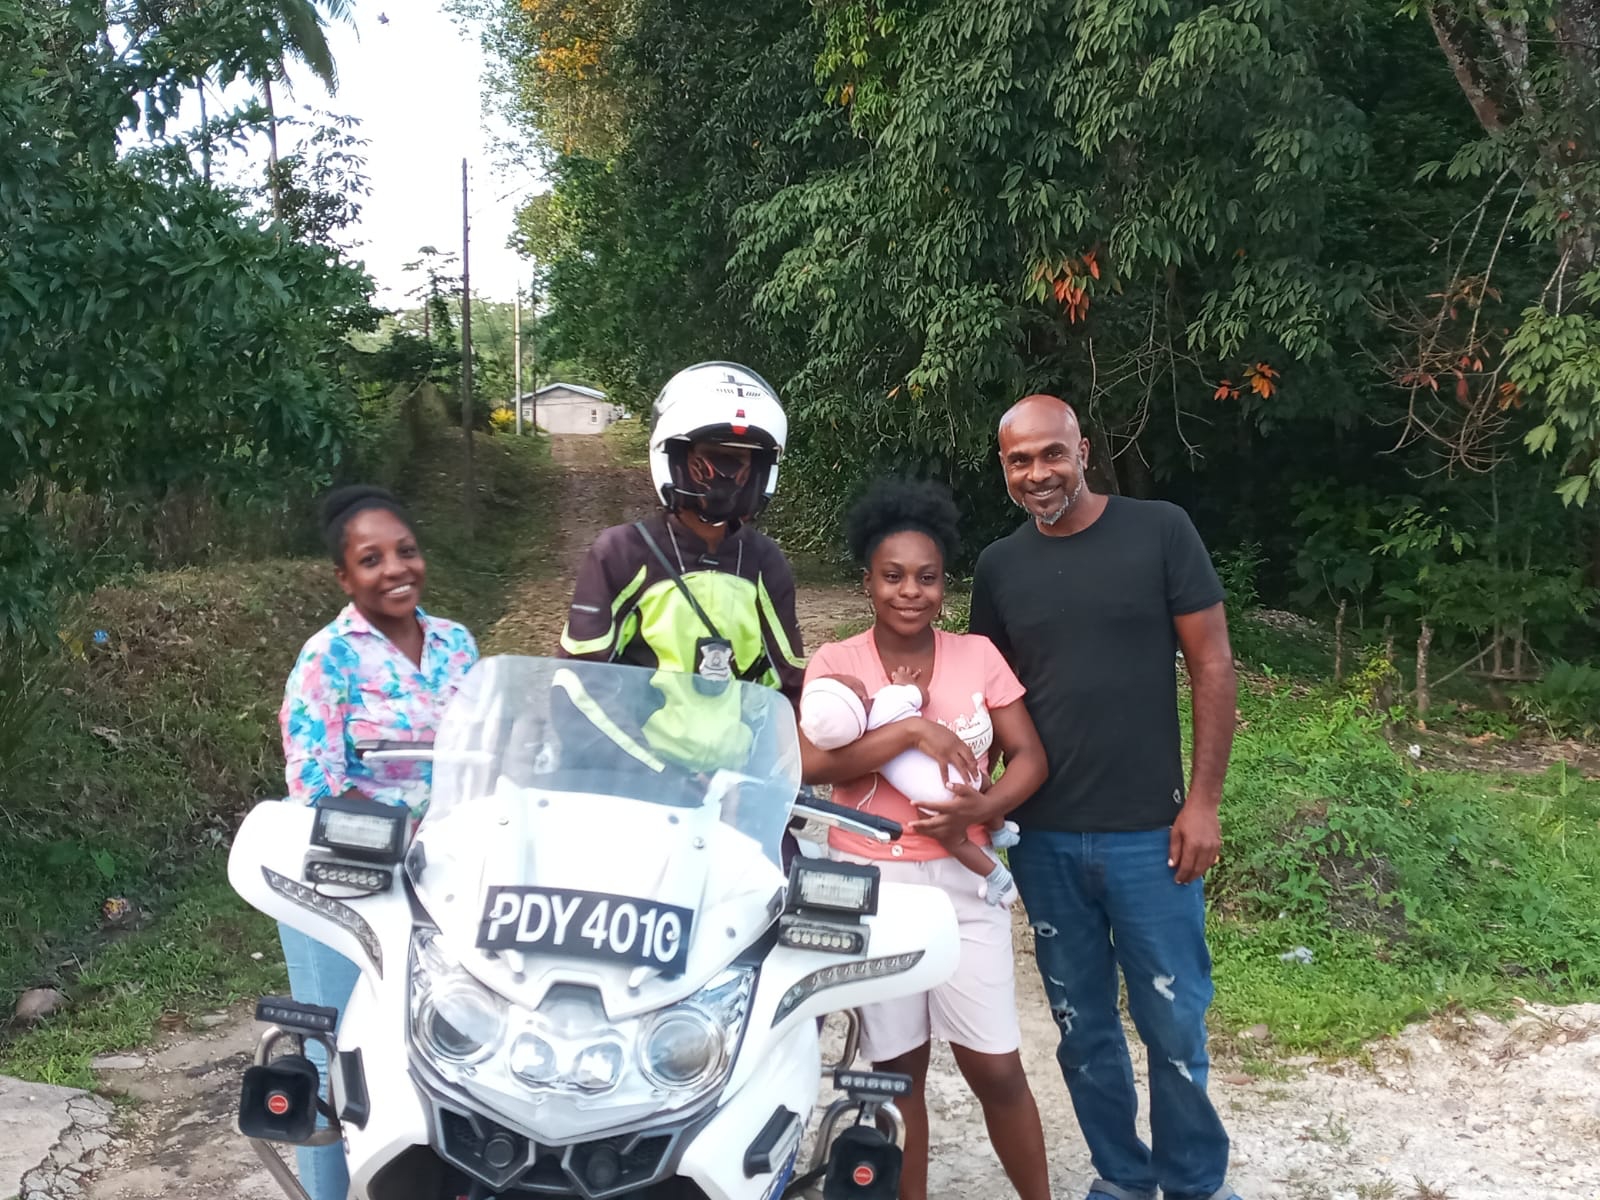 Motorcycle cop saves life of another baby